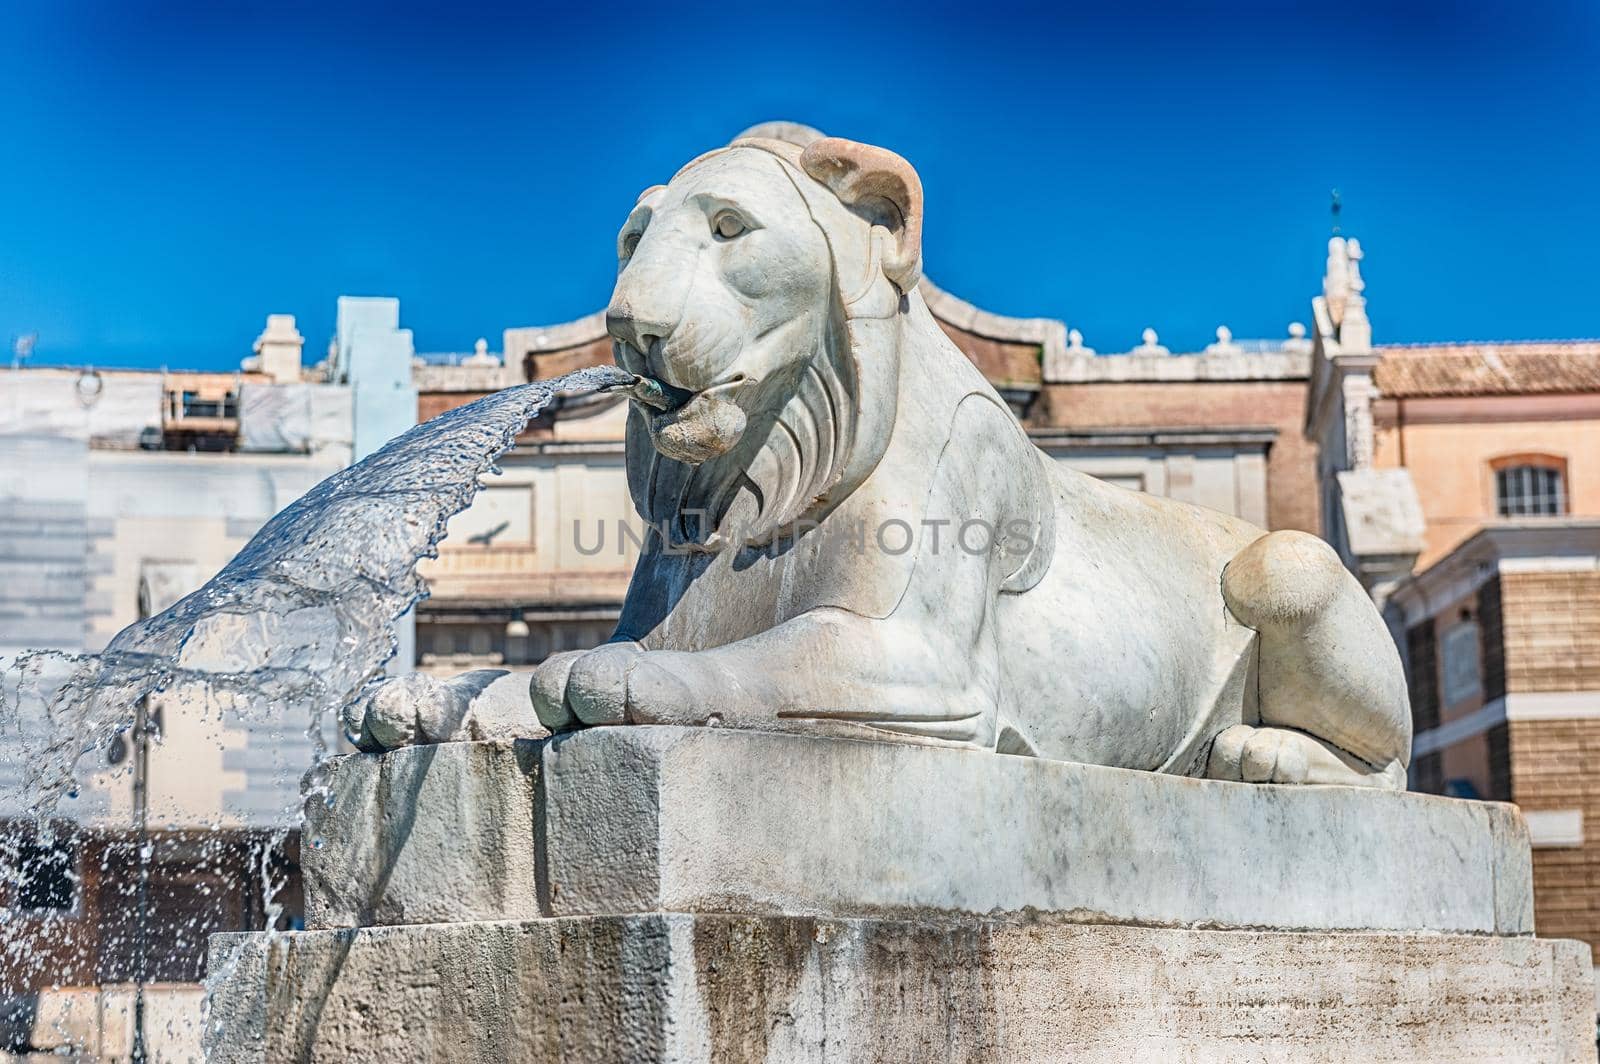 Statue in the iconic Piazza del Popolo, one of the main squares and landmarks in Rome, Italy